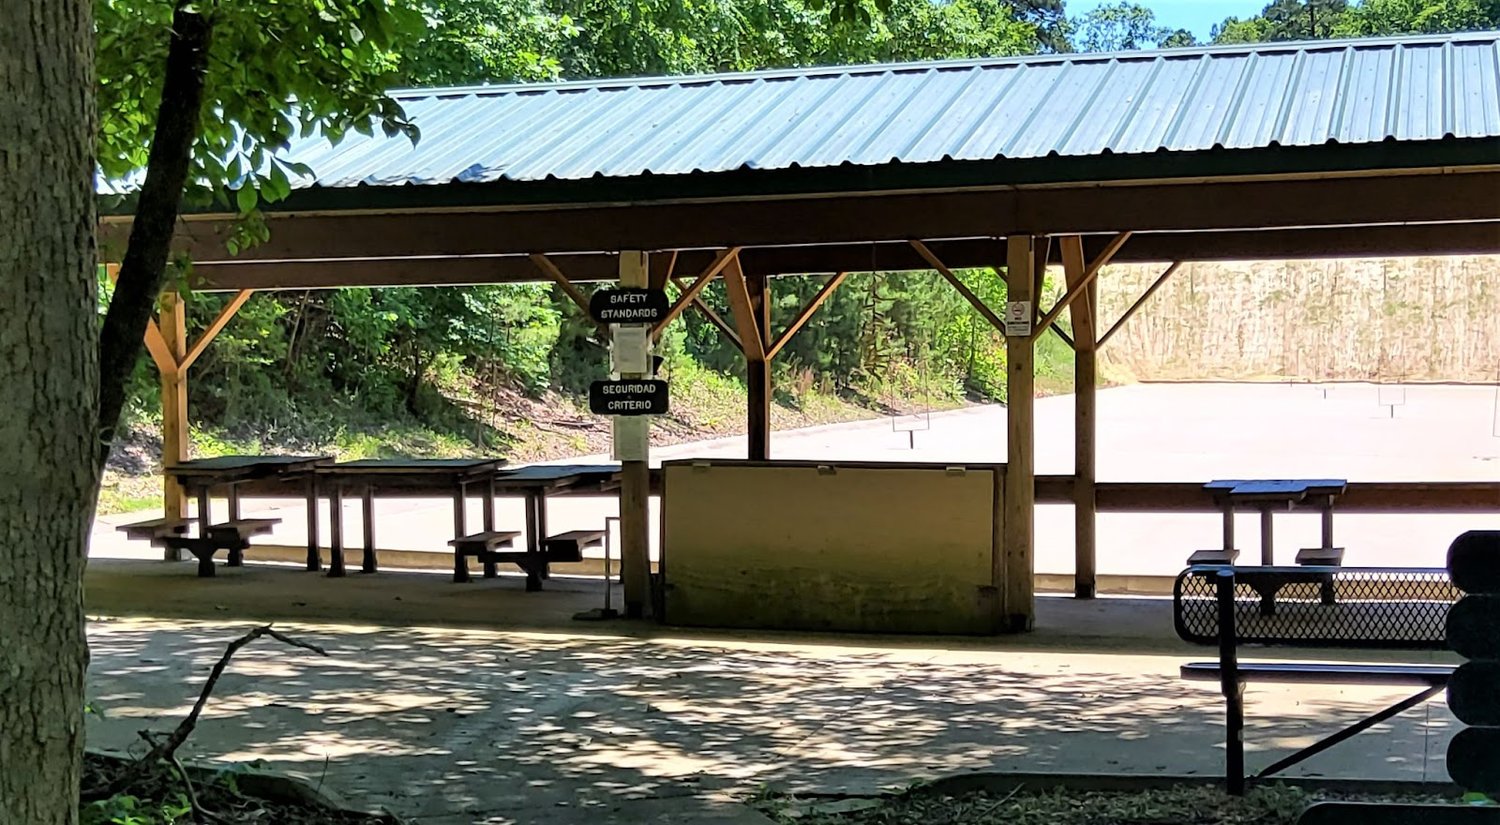 Hobbs State Park reopens shooting range | Newton County Times